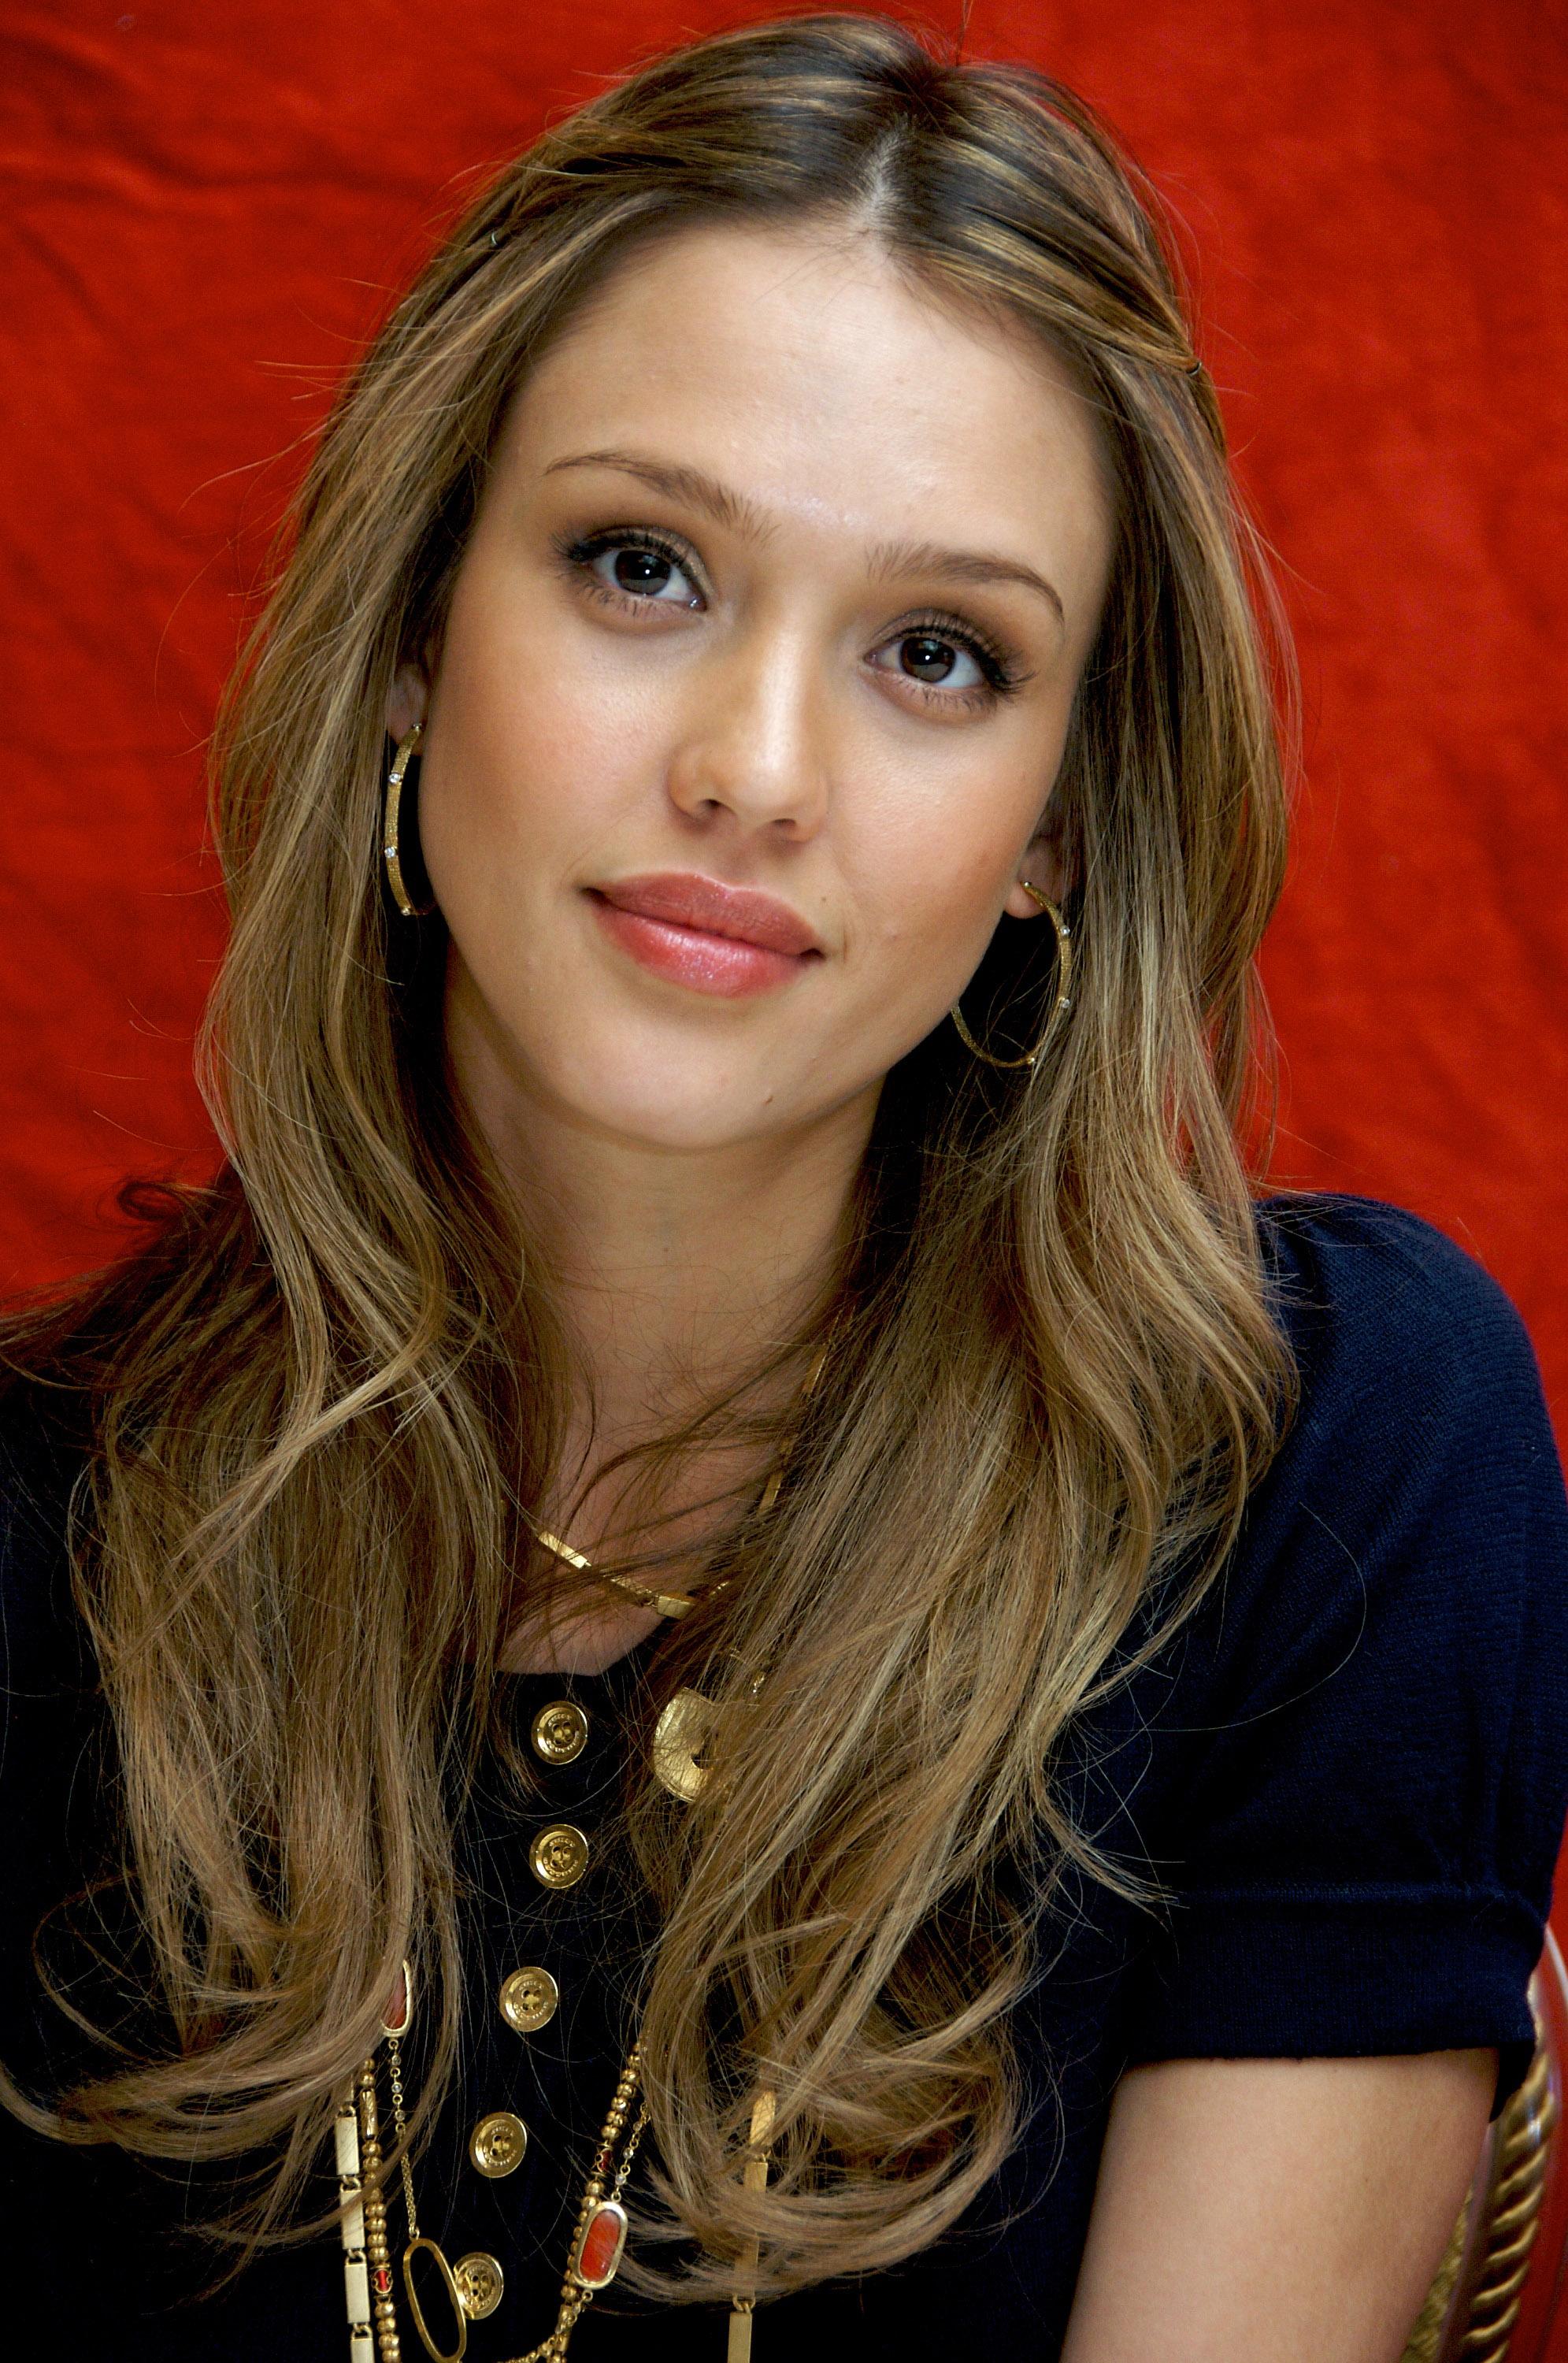 Jessica Alba Biography Net worth Favorite Things Color Music Perfume Facts